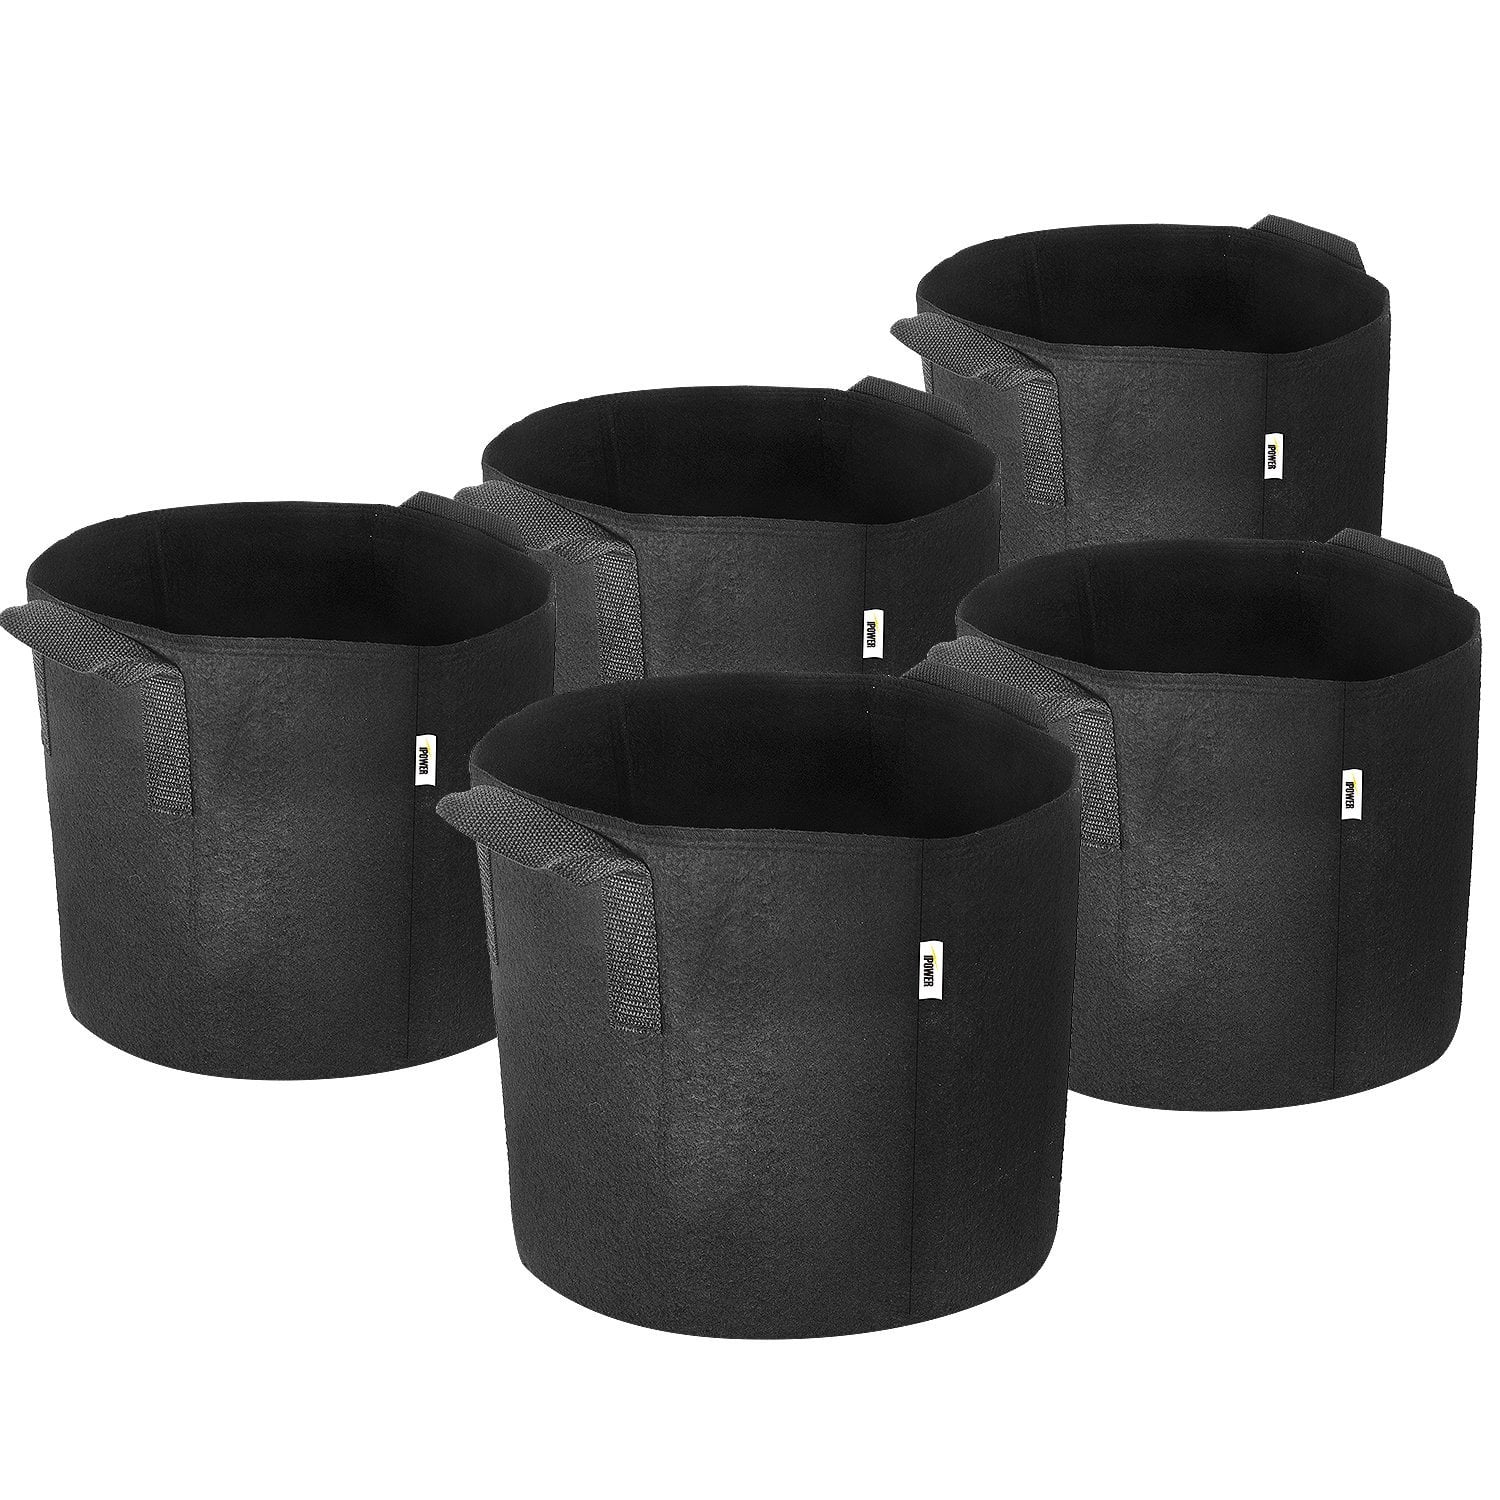 Soft-Sided Plant Pots Planting Container With Sturdy Handles 5 Pack Indoor & Outdoor Gardening For Flower & Vegetable 5 litres - Grow Bags With Soft Felt-Like Texture That Promote Aeration